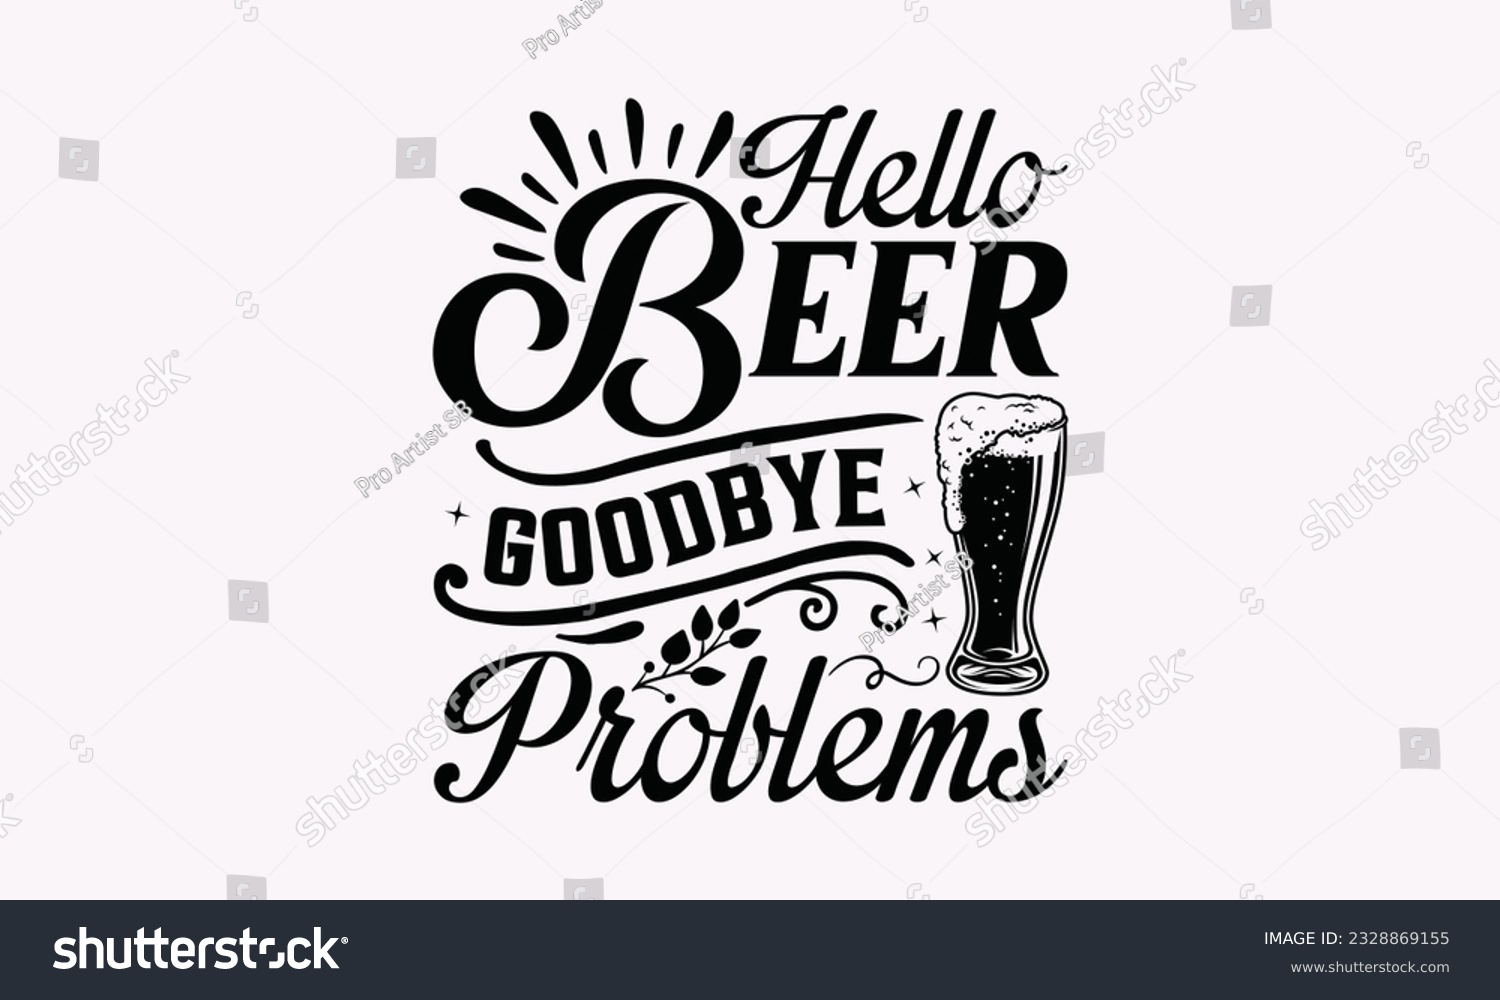 SVG of Hello Beer Goodbye Problems - Alcohol SVG Design, Drink Quotes, Calligraphy graphic design, Typography poster with old style camera and quote. svg